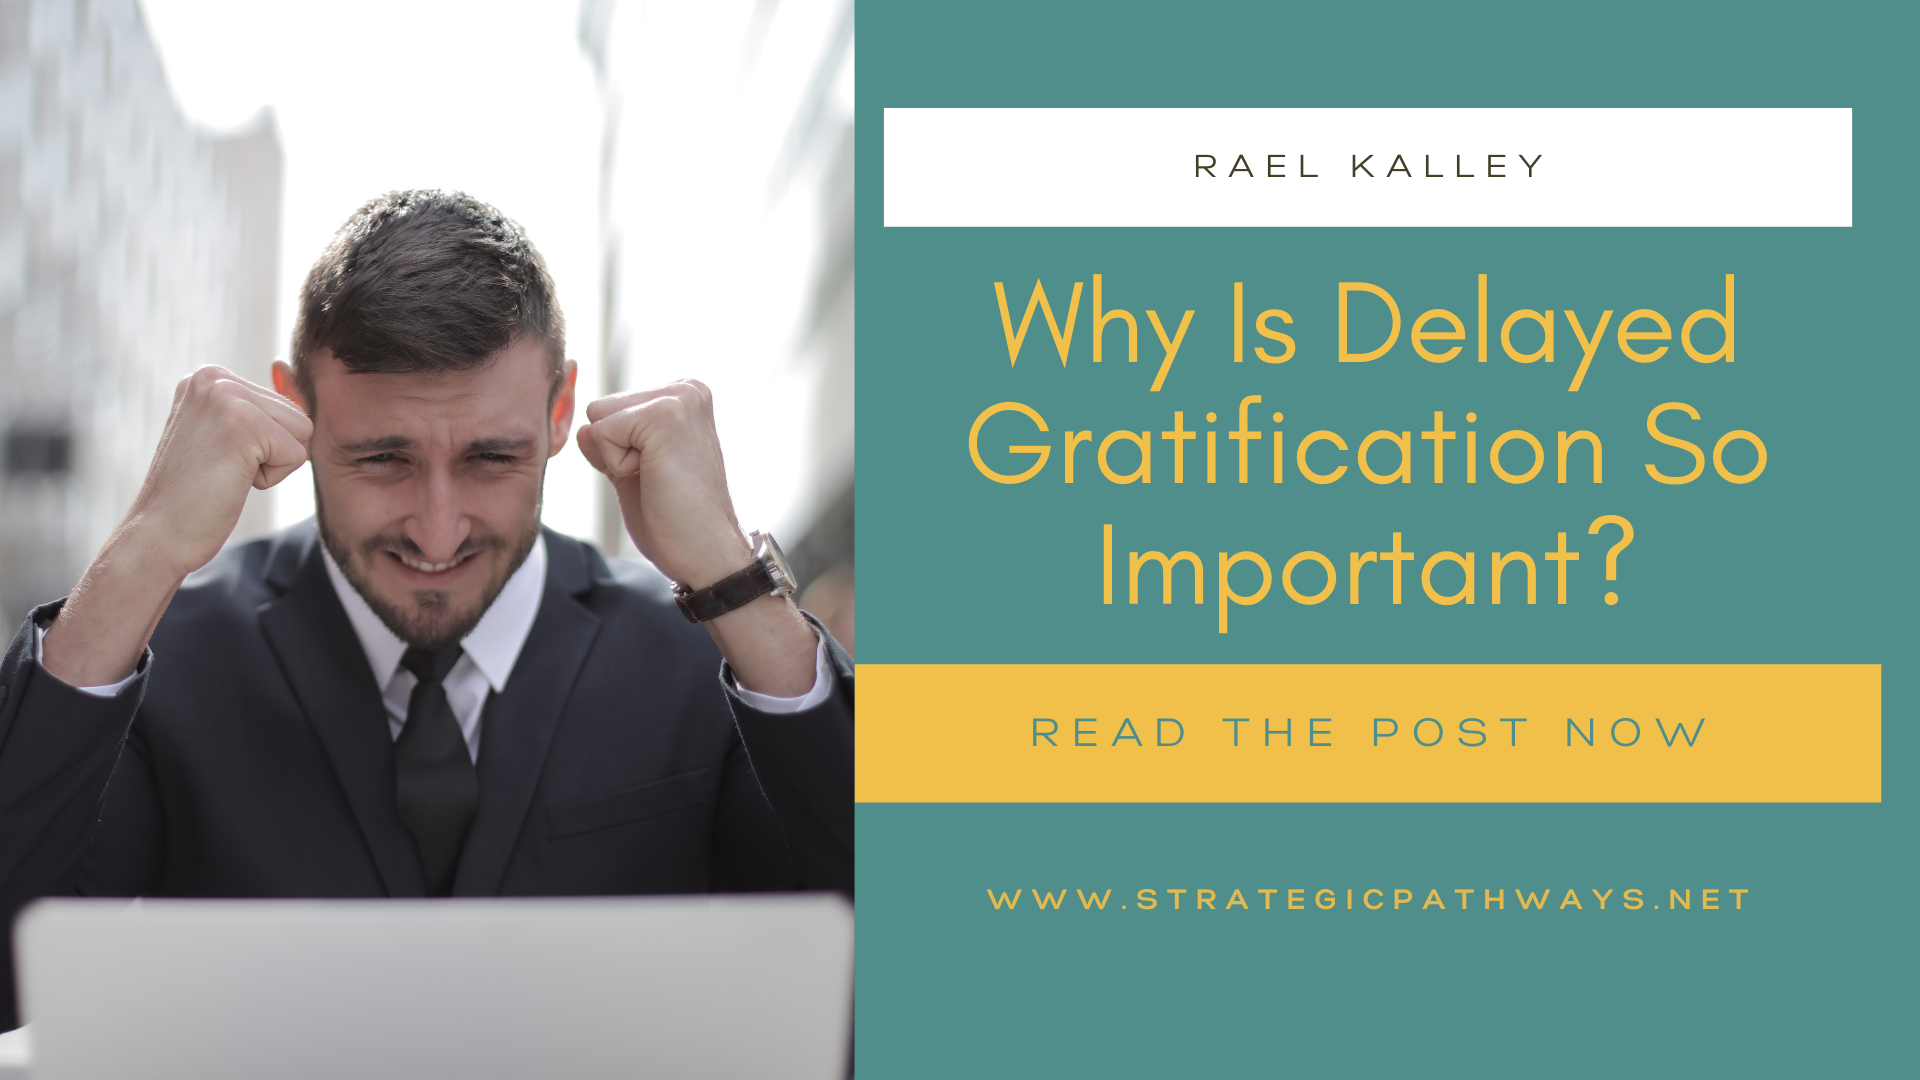 Text reading "Why is Delayed Gratification so Important?" and a man with his fists in the air